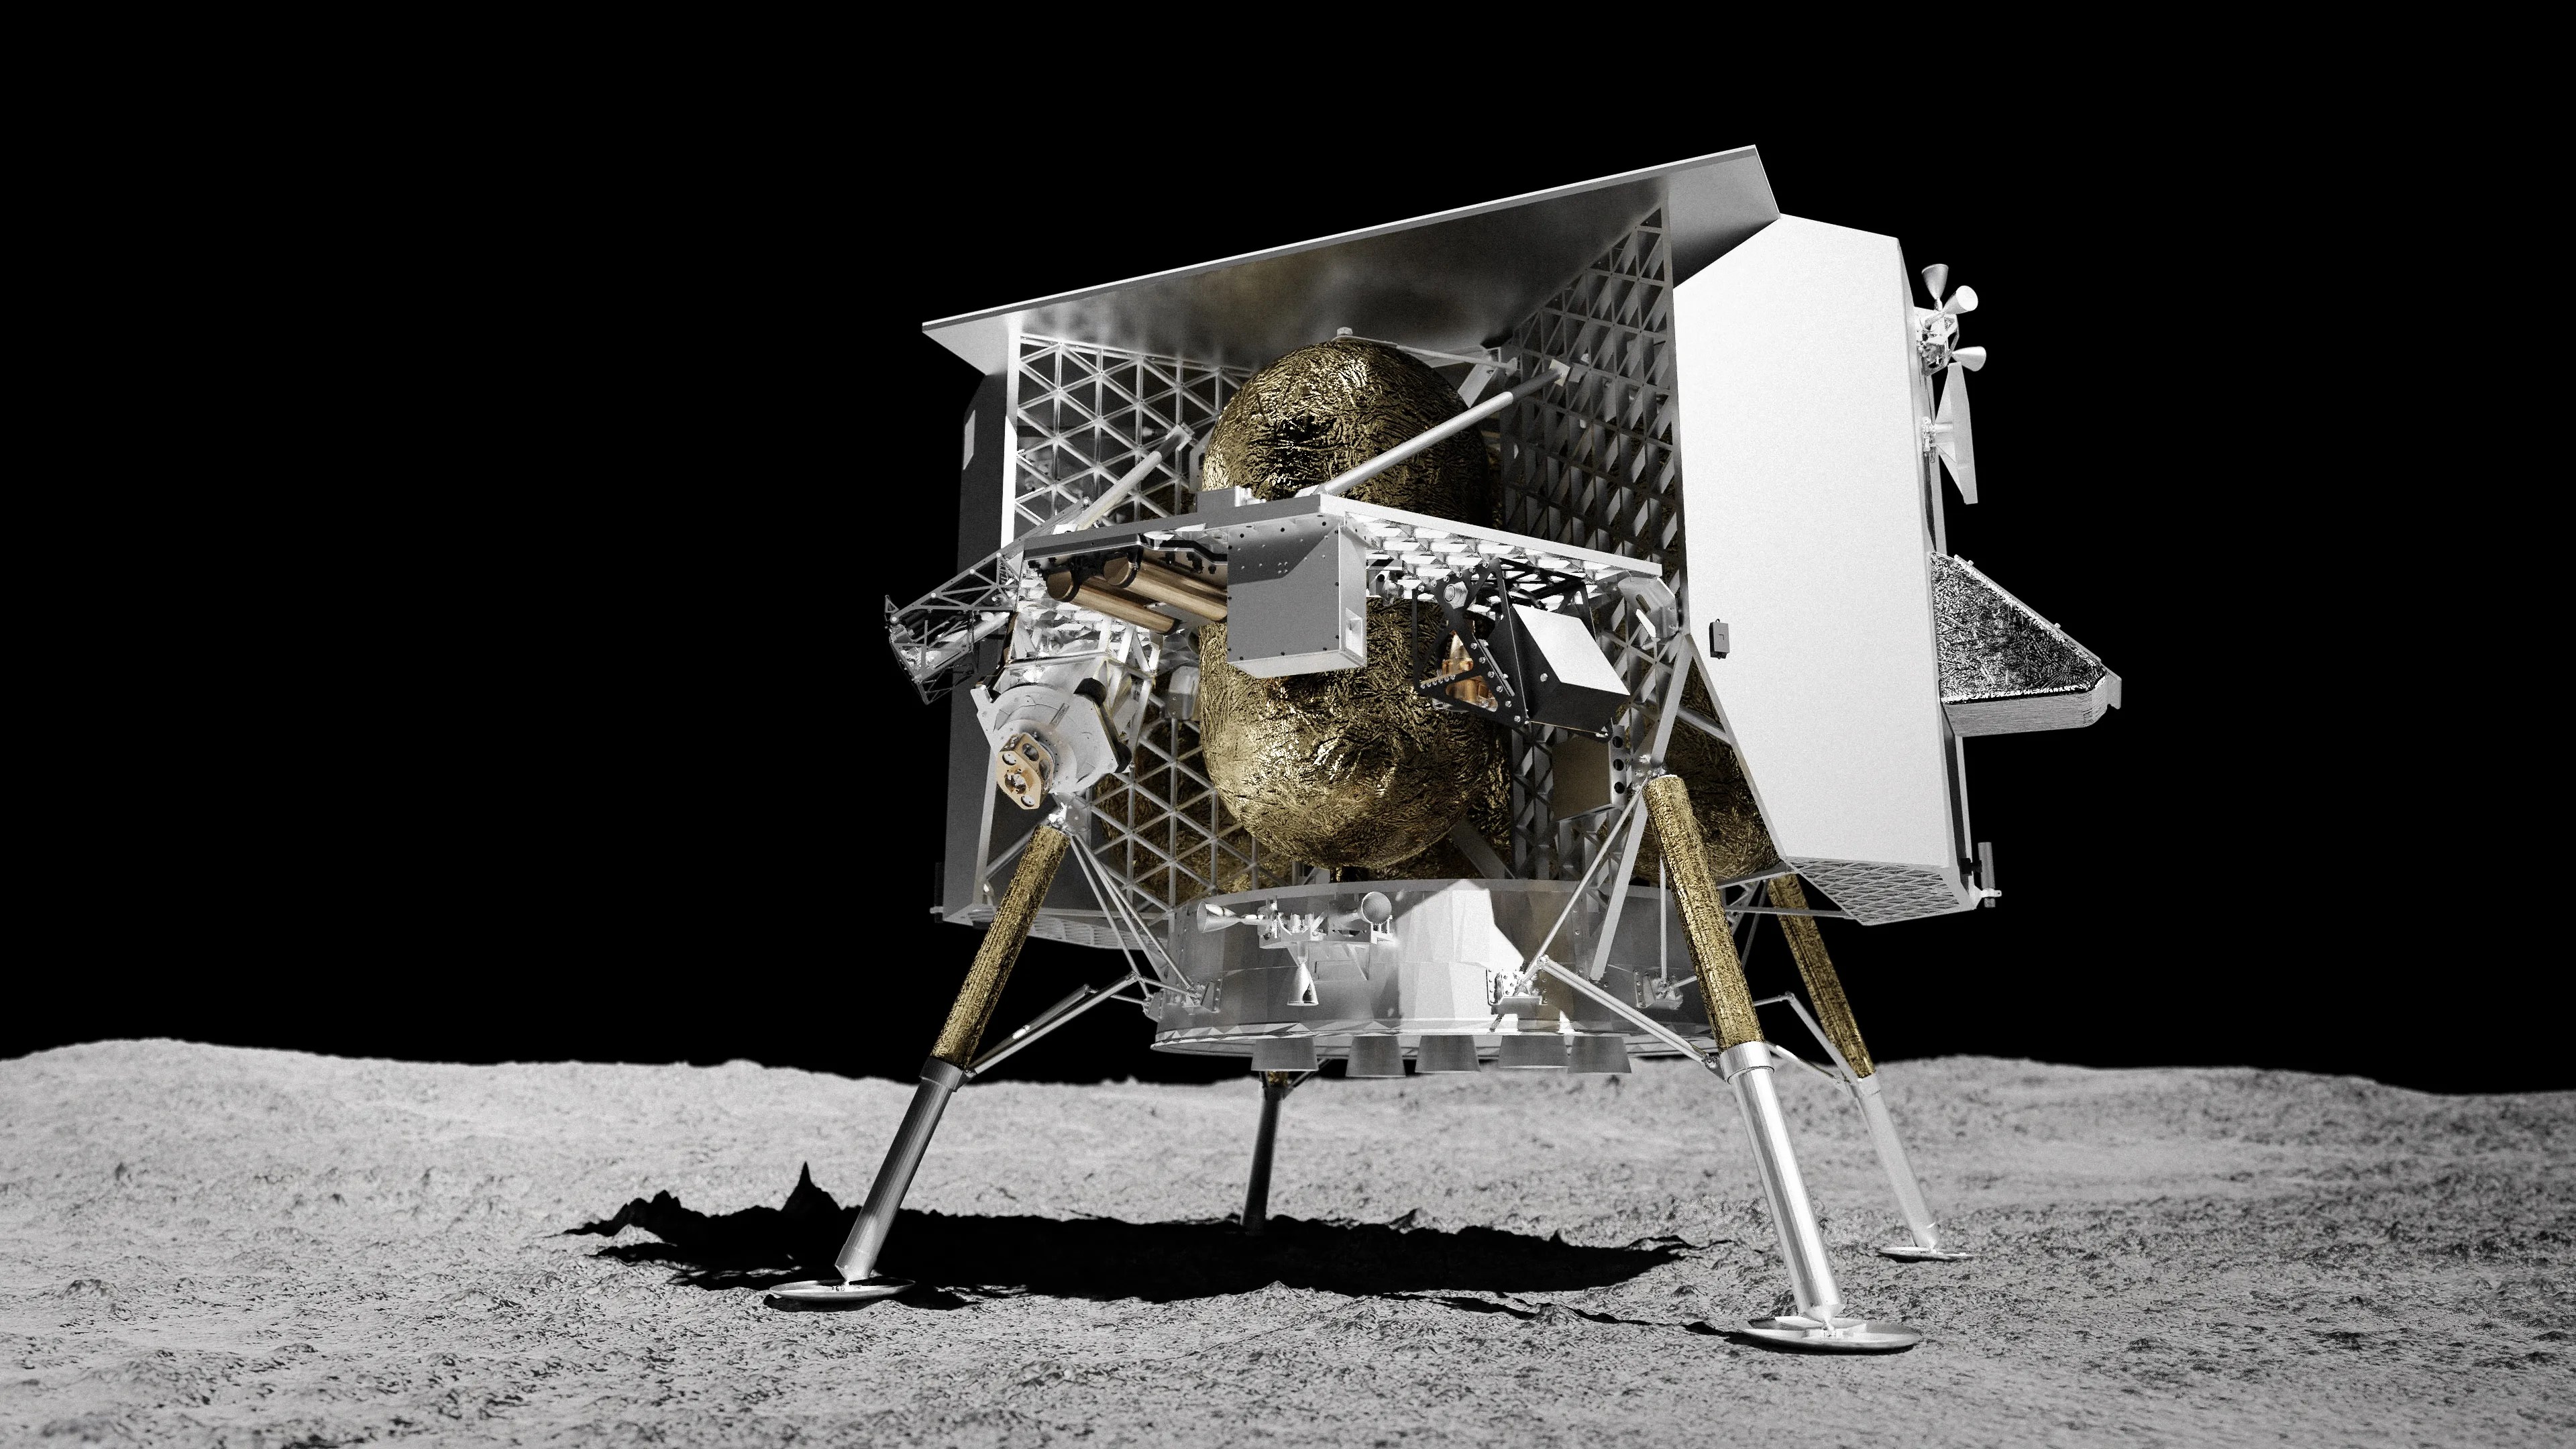 Astrobotic's Peregrine lunar lander launched on 8 January 2024 to deliver 5 NASA CLPS science payloads to Sinus Viscositatis